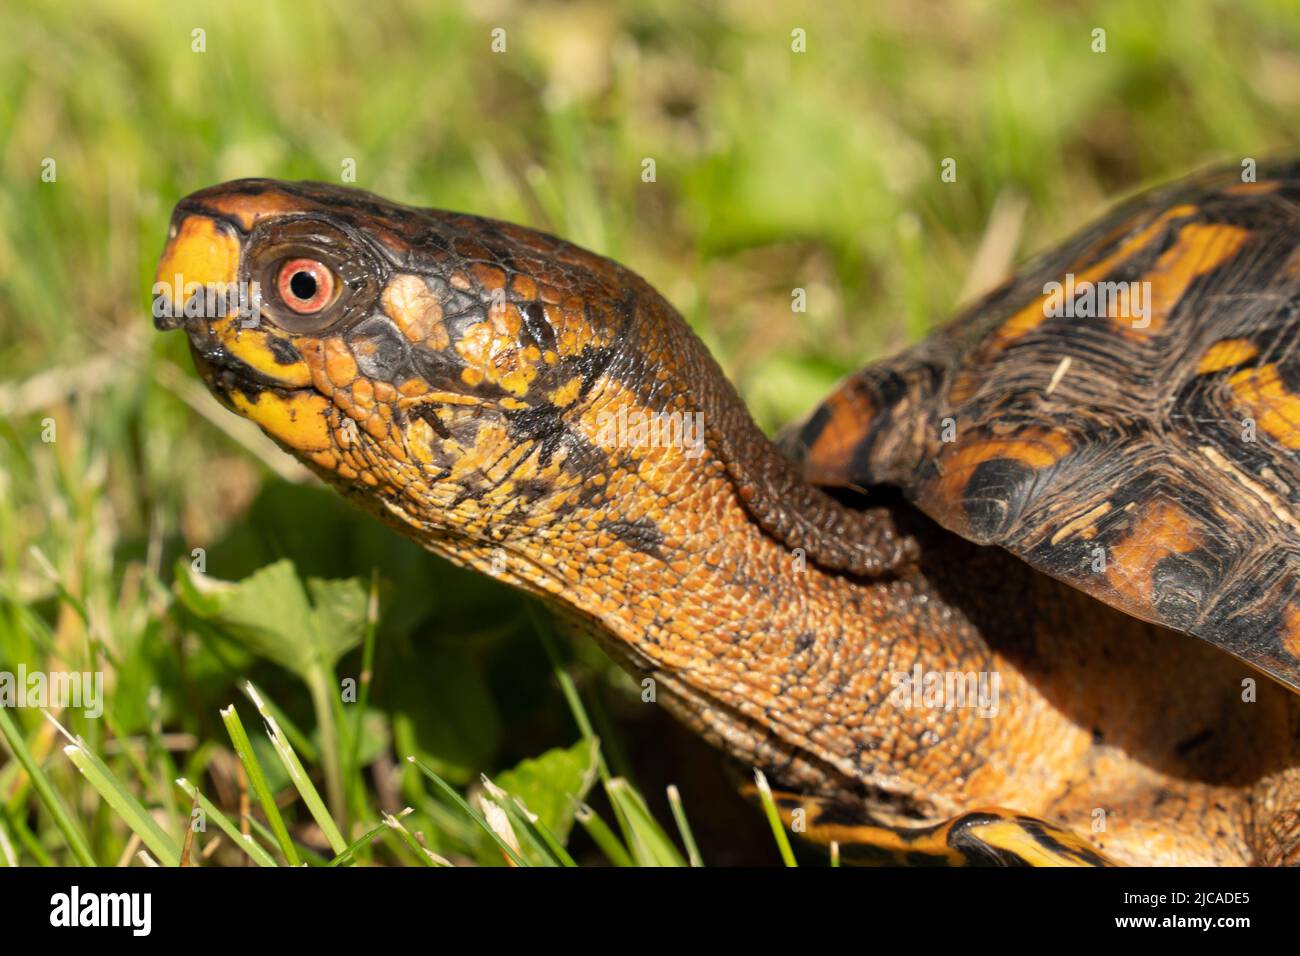 Close-up of Eastern Box Turtle streching his neck to look around. Stock Photo